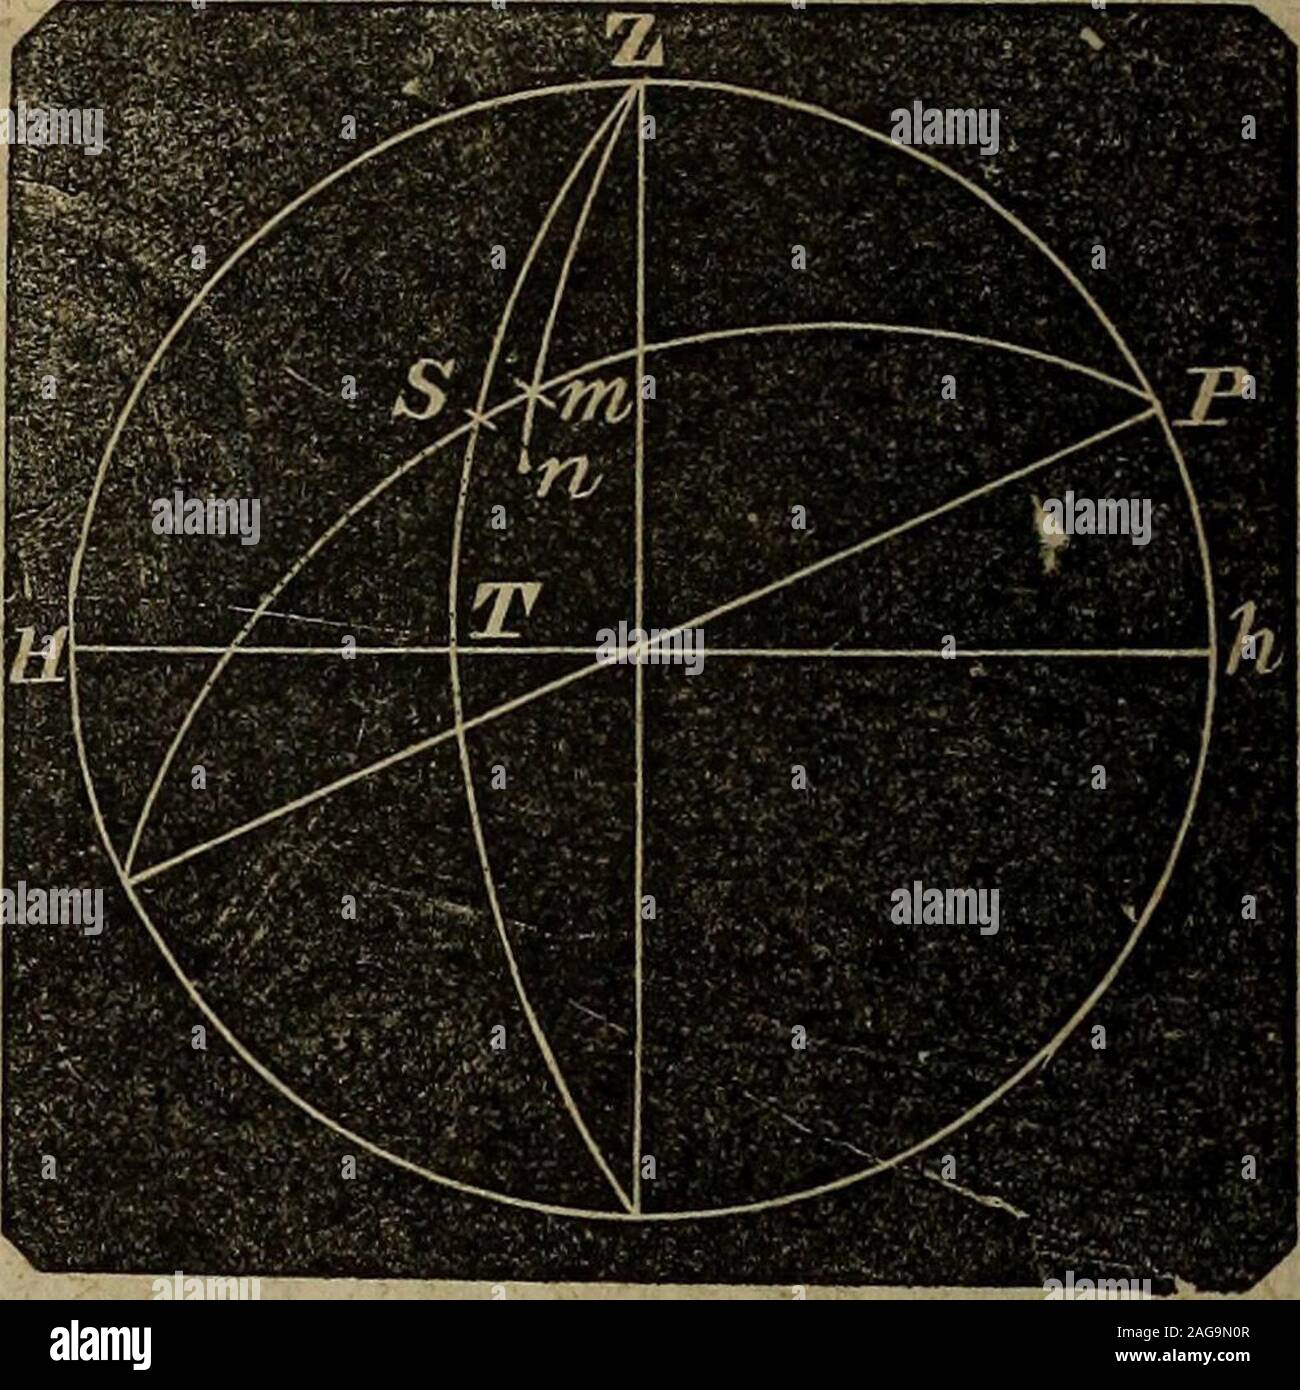 . A treatise on surveying and navigation: uniting the theoretical, the practical, and the educational features of these subjects. pole, S theposition of the sun, and PSthe suns polar distance.* When S comes on to themeridian, it is then apparentnoon; and the angle ZPS ofthe triangle ZPS measuresthe interval from apparentnoon, at the rate of four min-utes to one degree. The side PS is the polardistance, the side ZS is the co-altitude, and the side PZ is the co-latitude. Now, in every treatise on spherical trigonometry, it is demon-strated as a fundamental principle, that The cosine of any angle Stock Photo